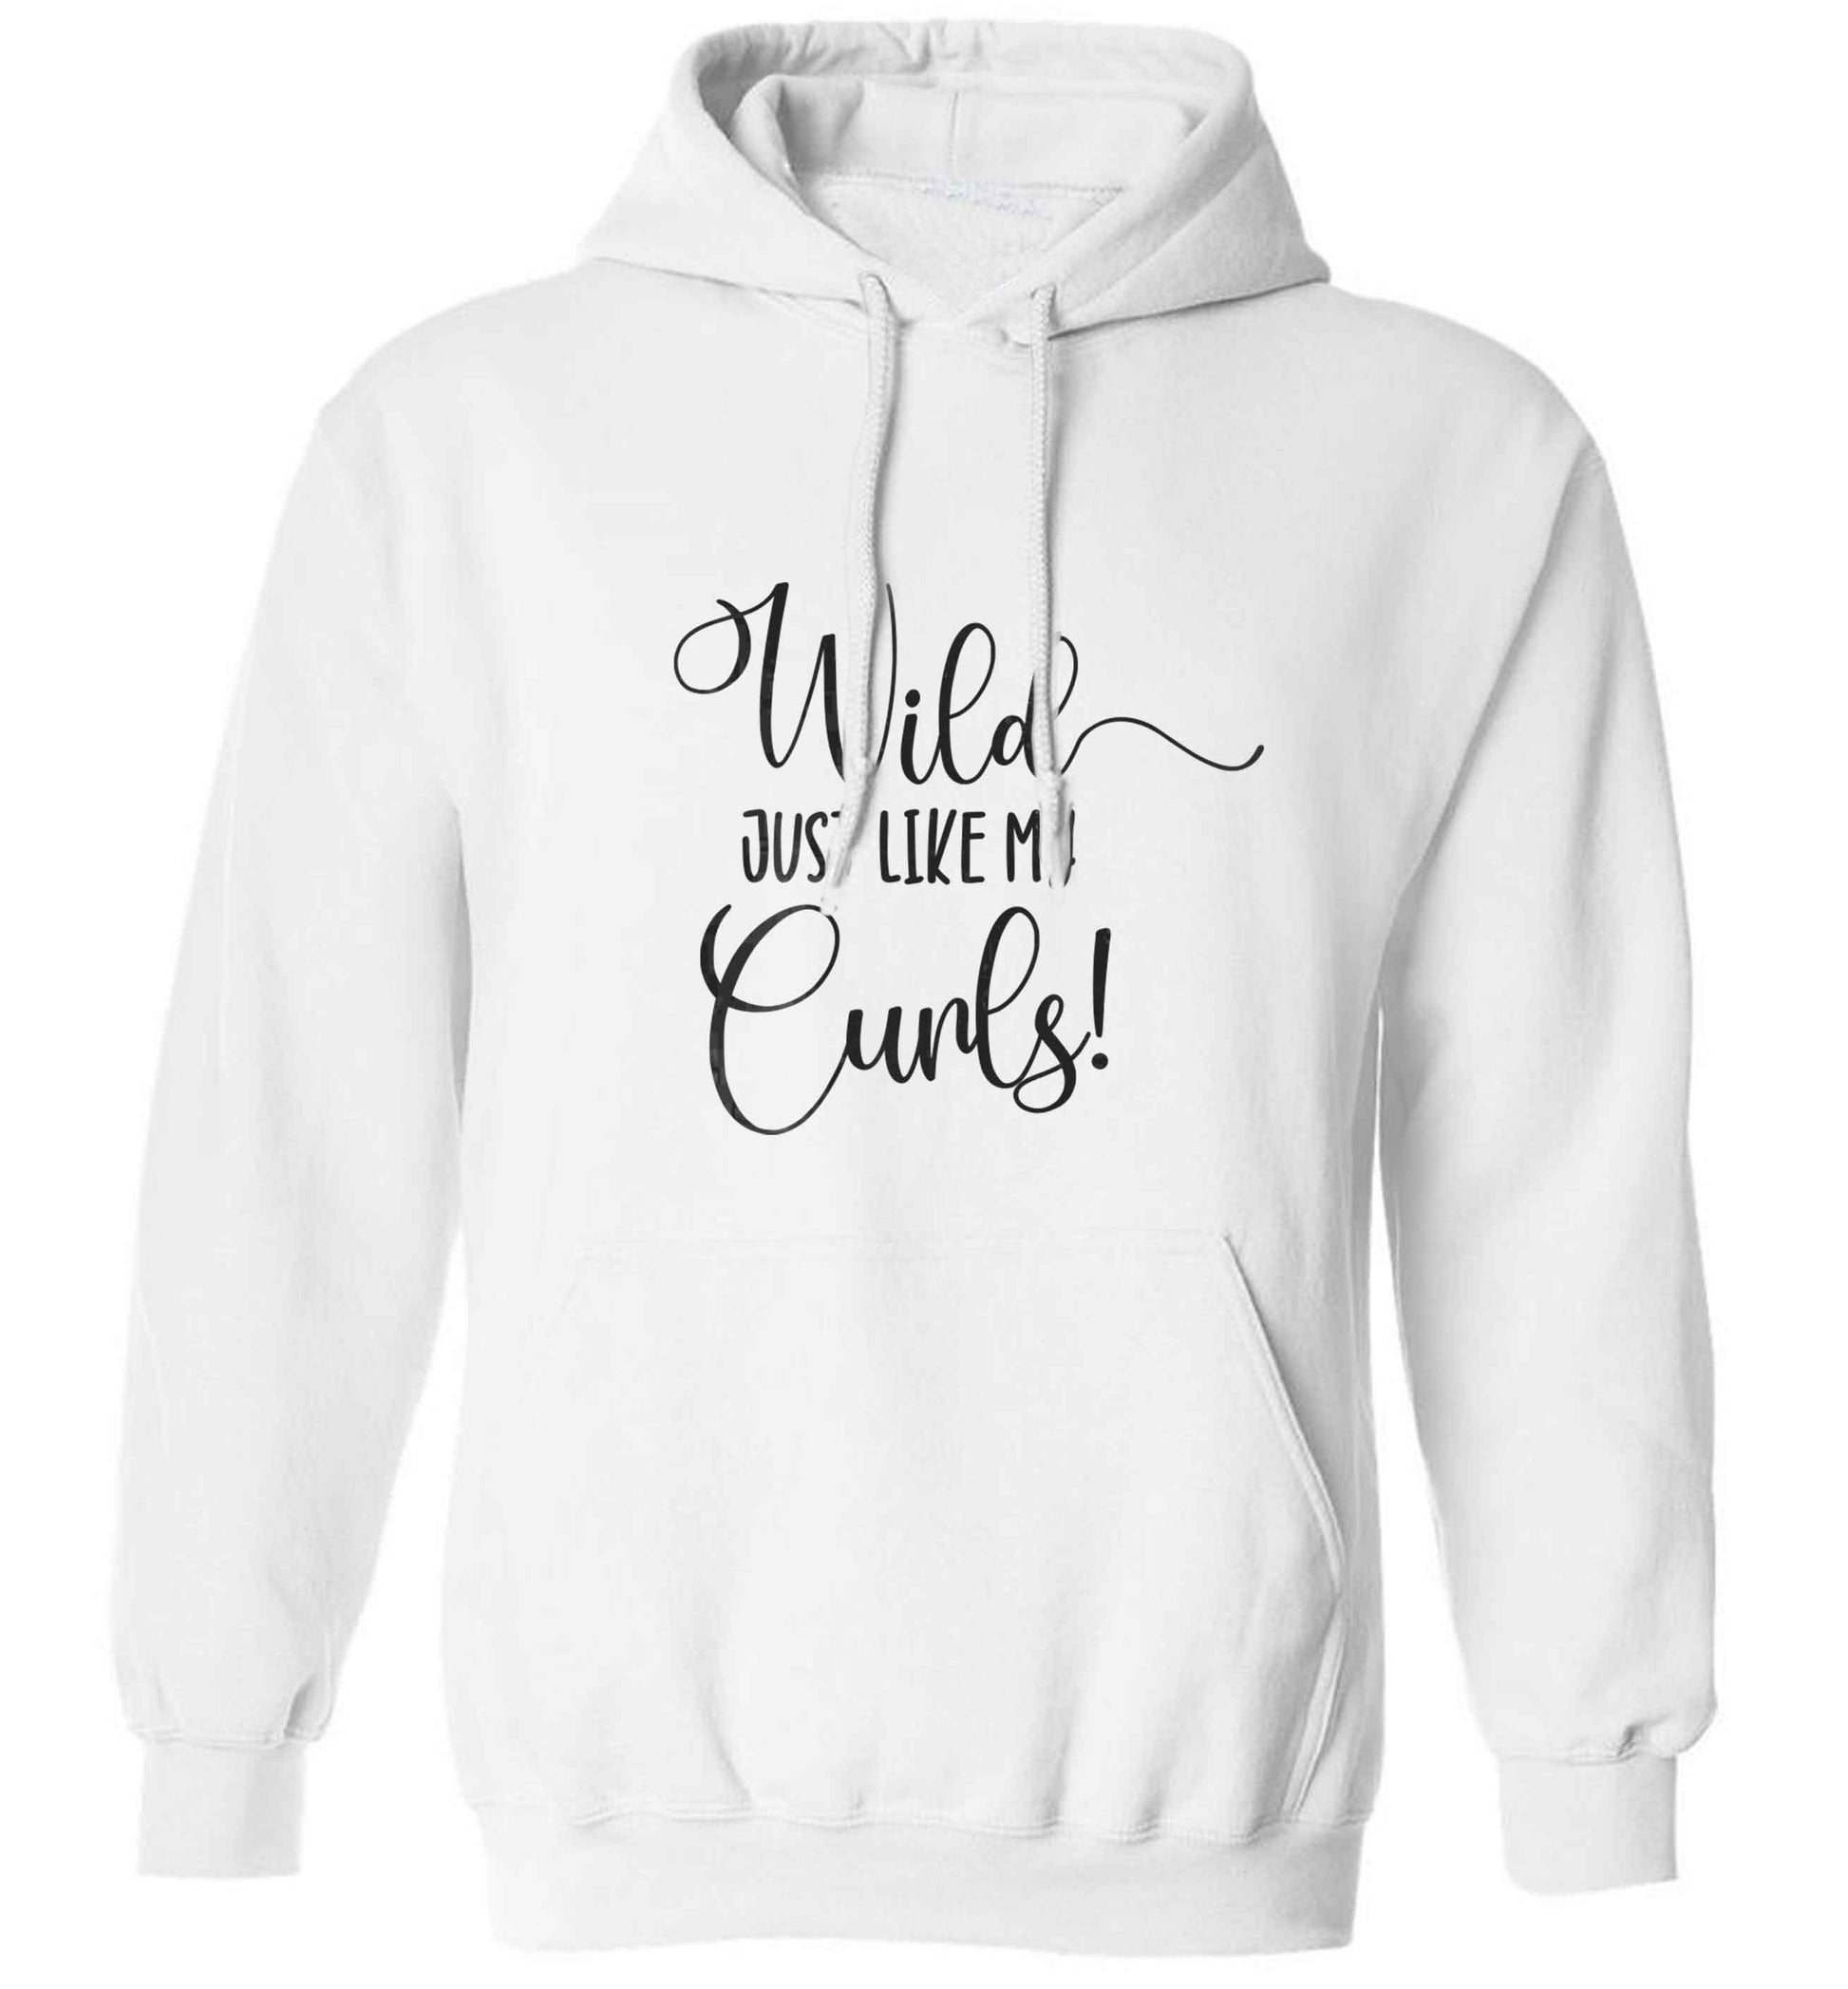 Wild just like my curls adults unisex white hoodie 2XL